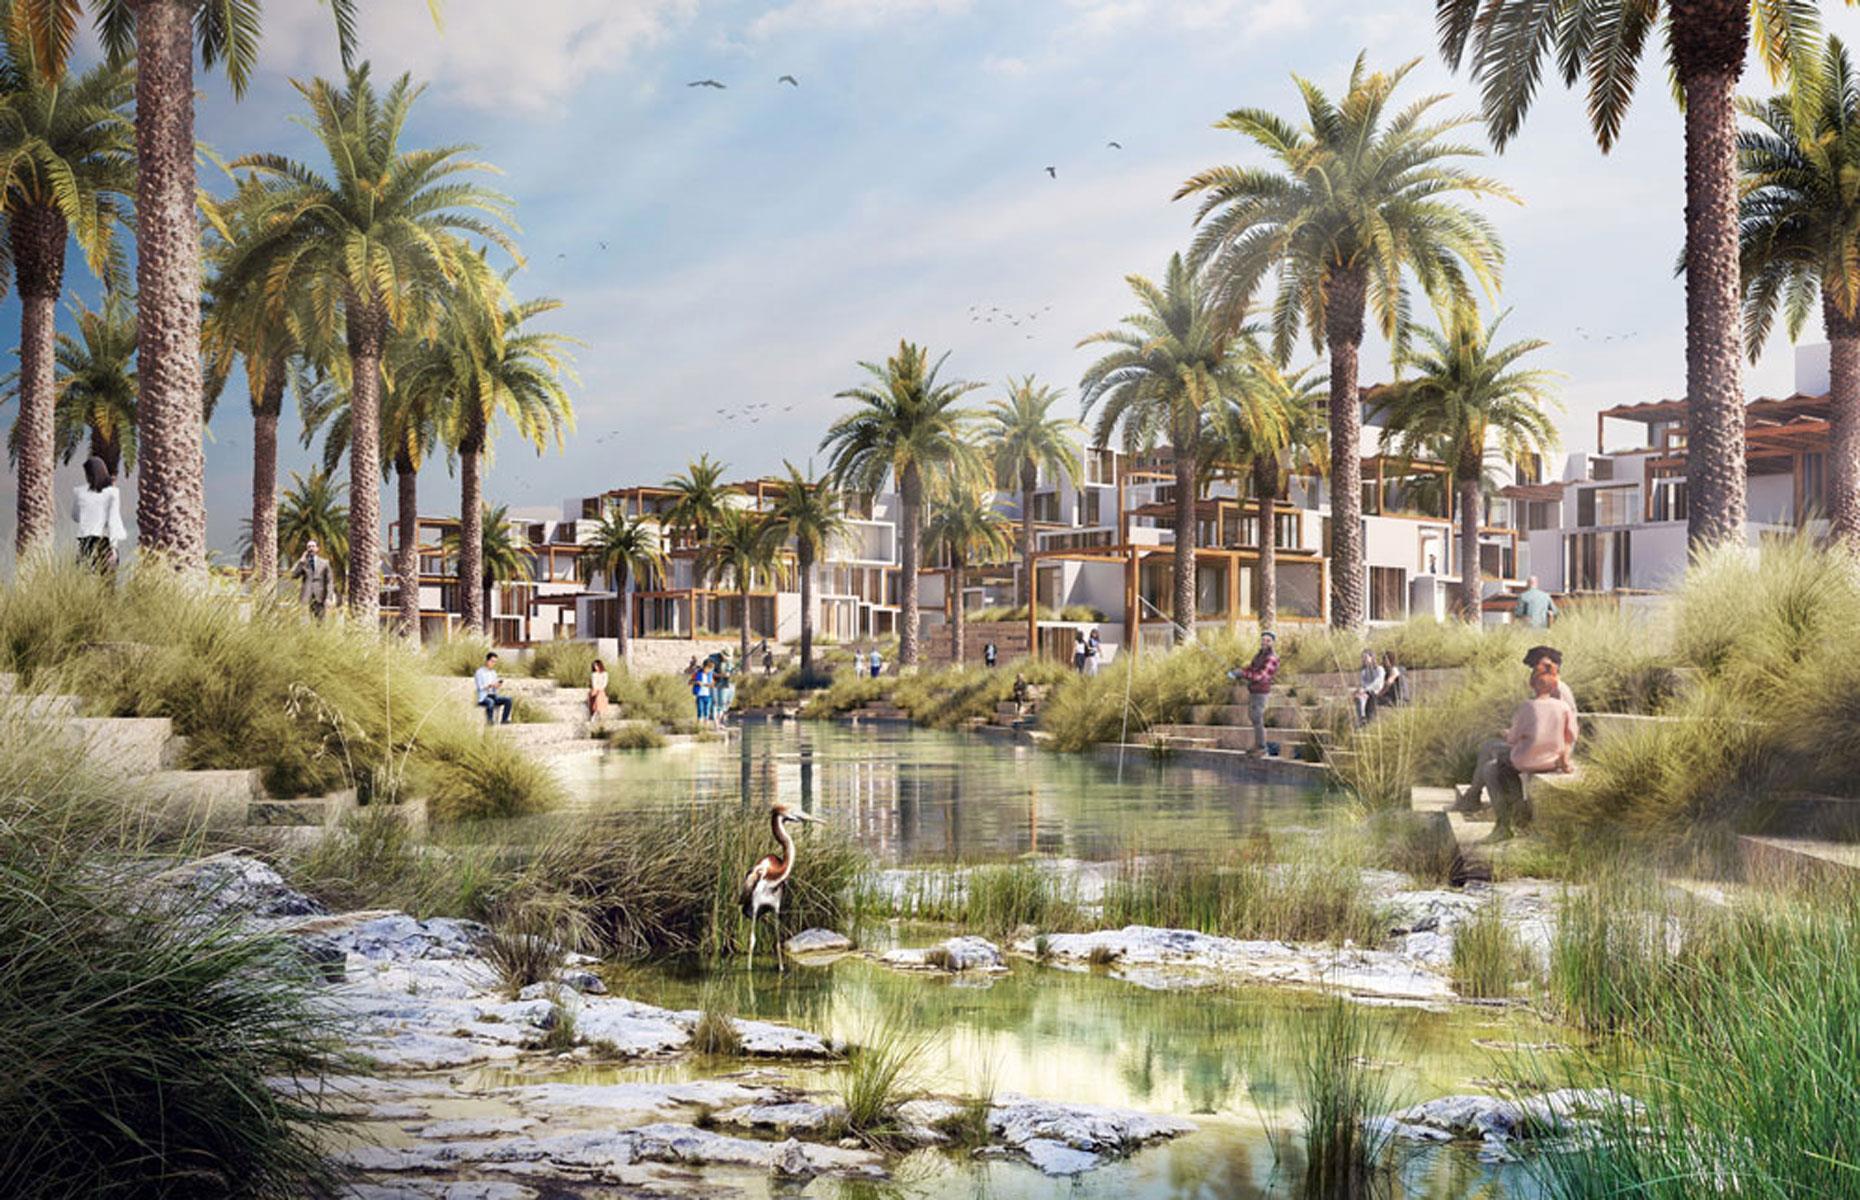 <p>Imbued with smart tech to improve liveability and efficiency, the pedestrian-friendly city will be a petrol-free zone, with bikes, electric buggies, an electric shuttle and autonomous electric vehicles the only modes of transport. Everything about the community has been designed to promote health, well-being and biodiversity. At its heart will be a wadi oasis – a channel that helps with stormwater management – surrounded by various amenity-packed hubs.</p>